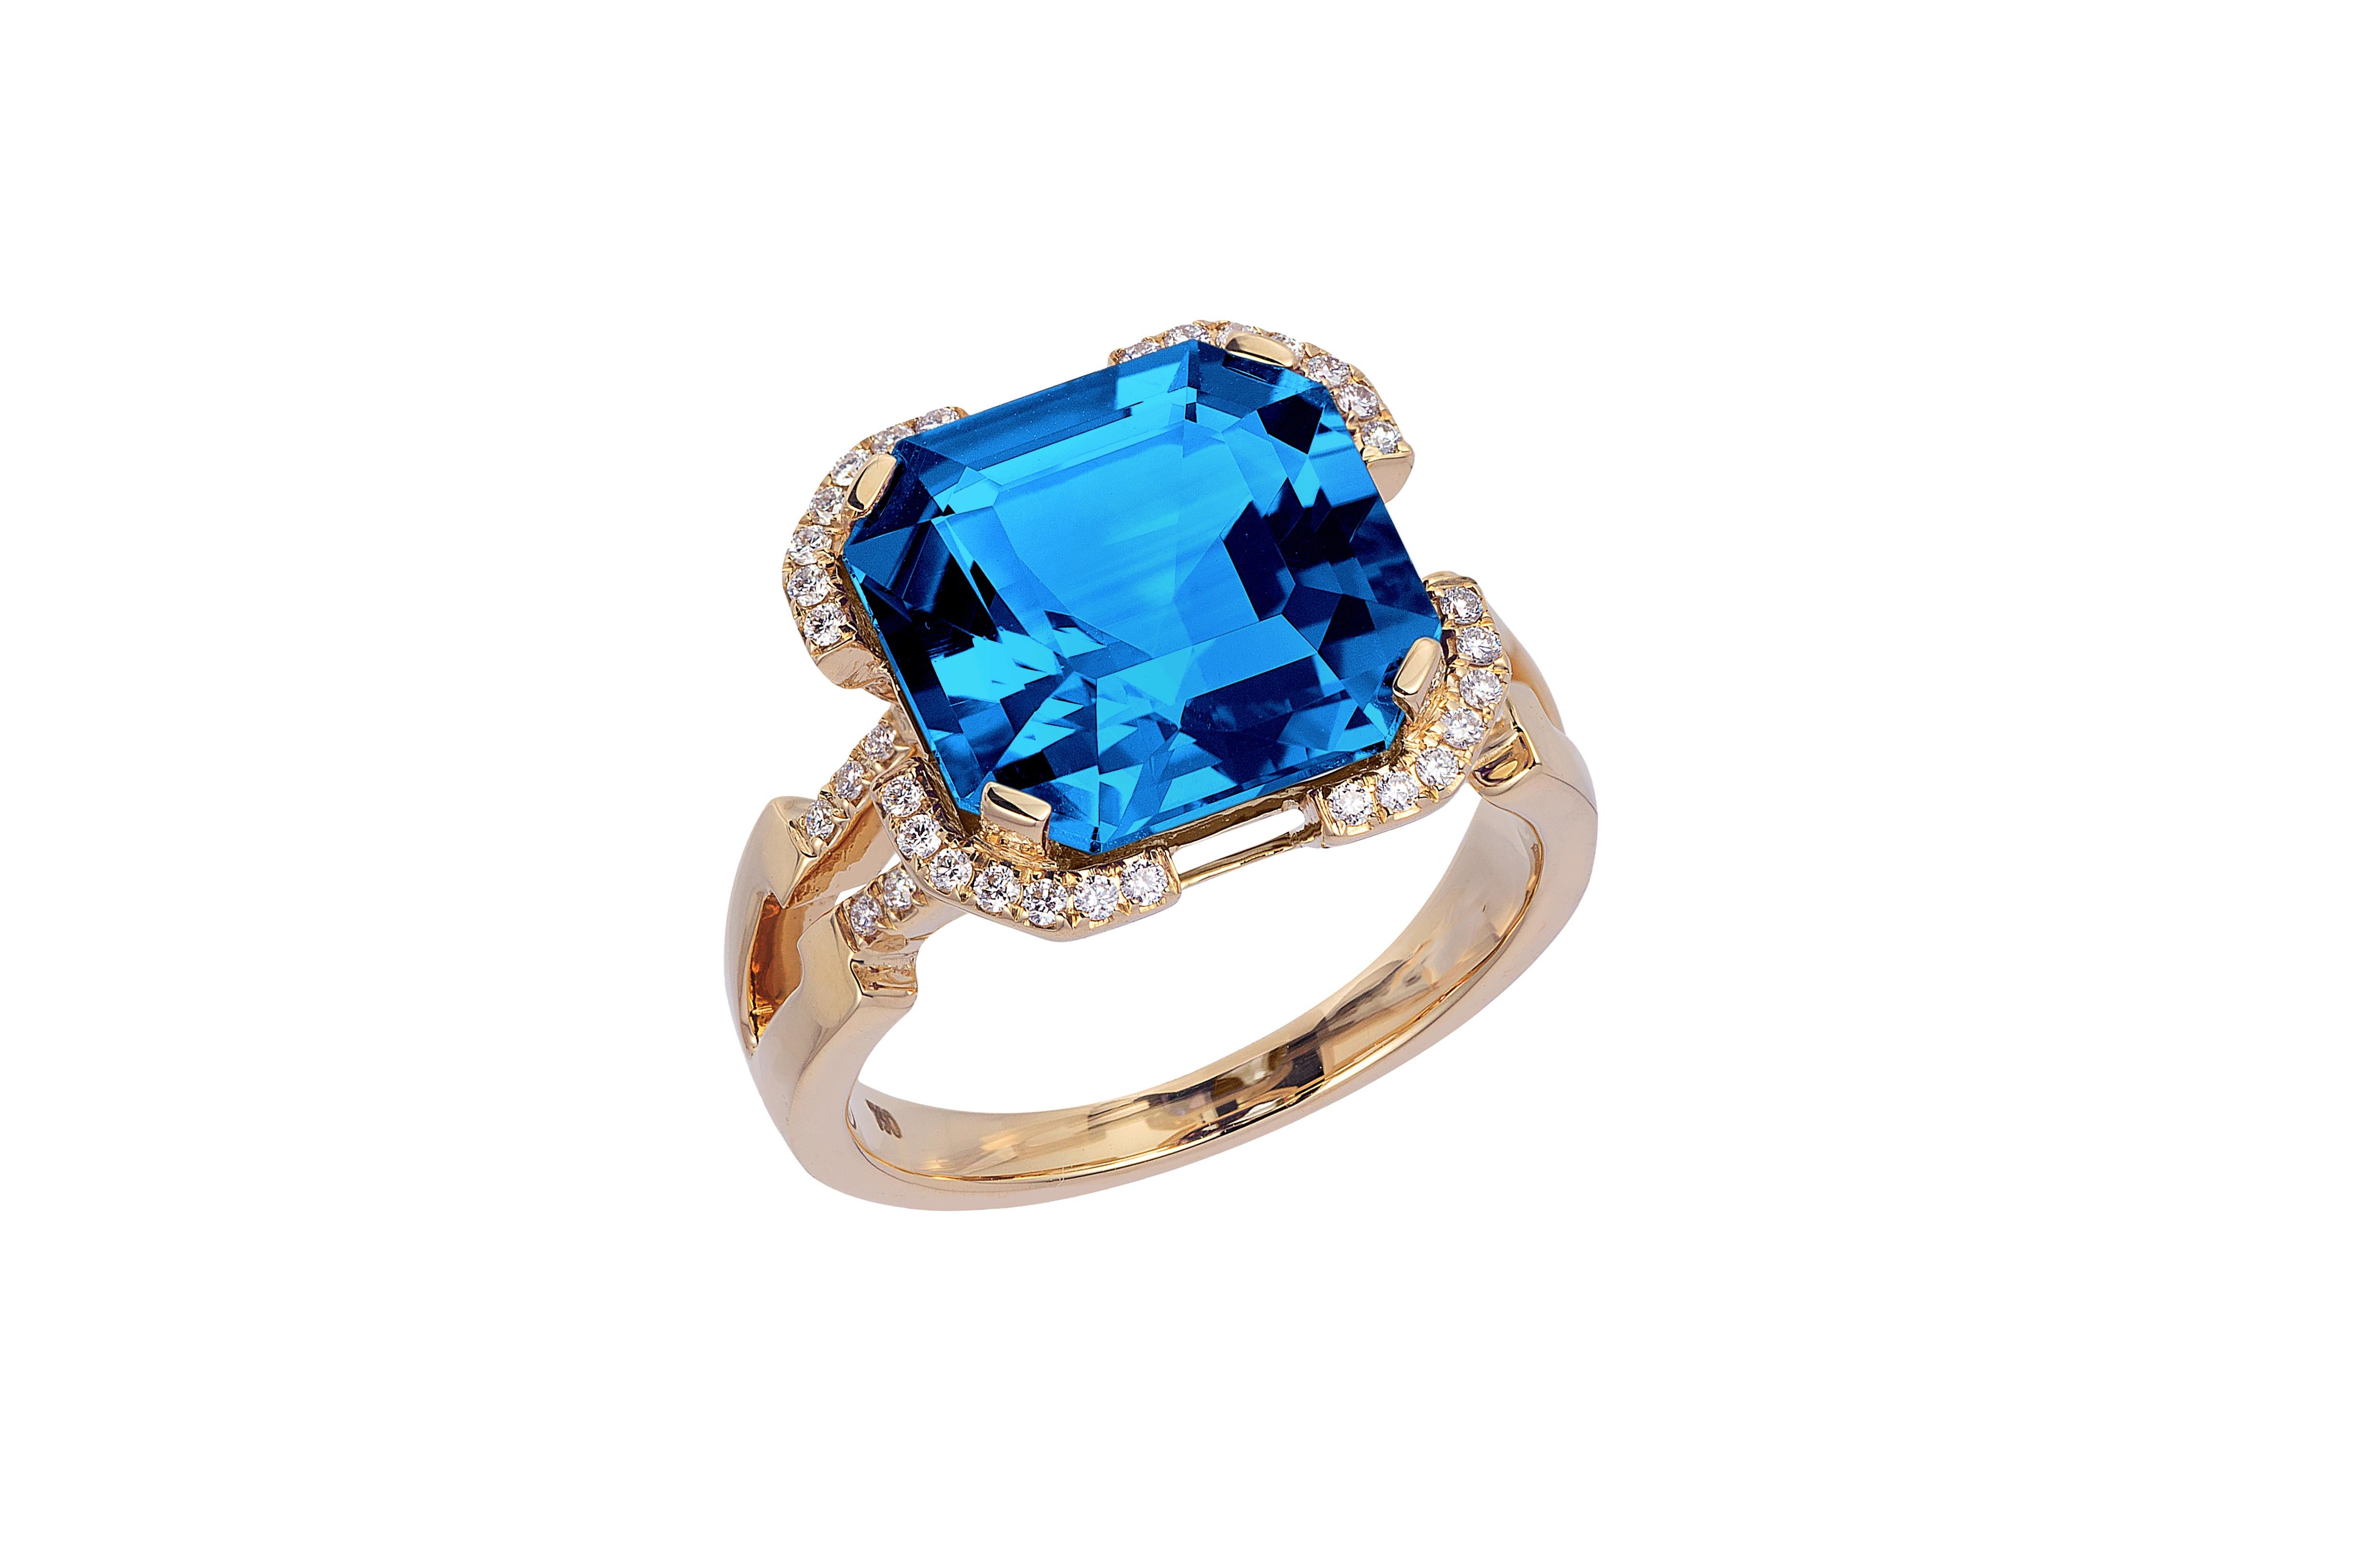 London Blue Topaz Square Emerald Cut Ring in 18K Yellow Gold with Diamonds, from 